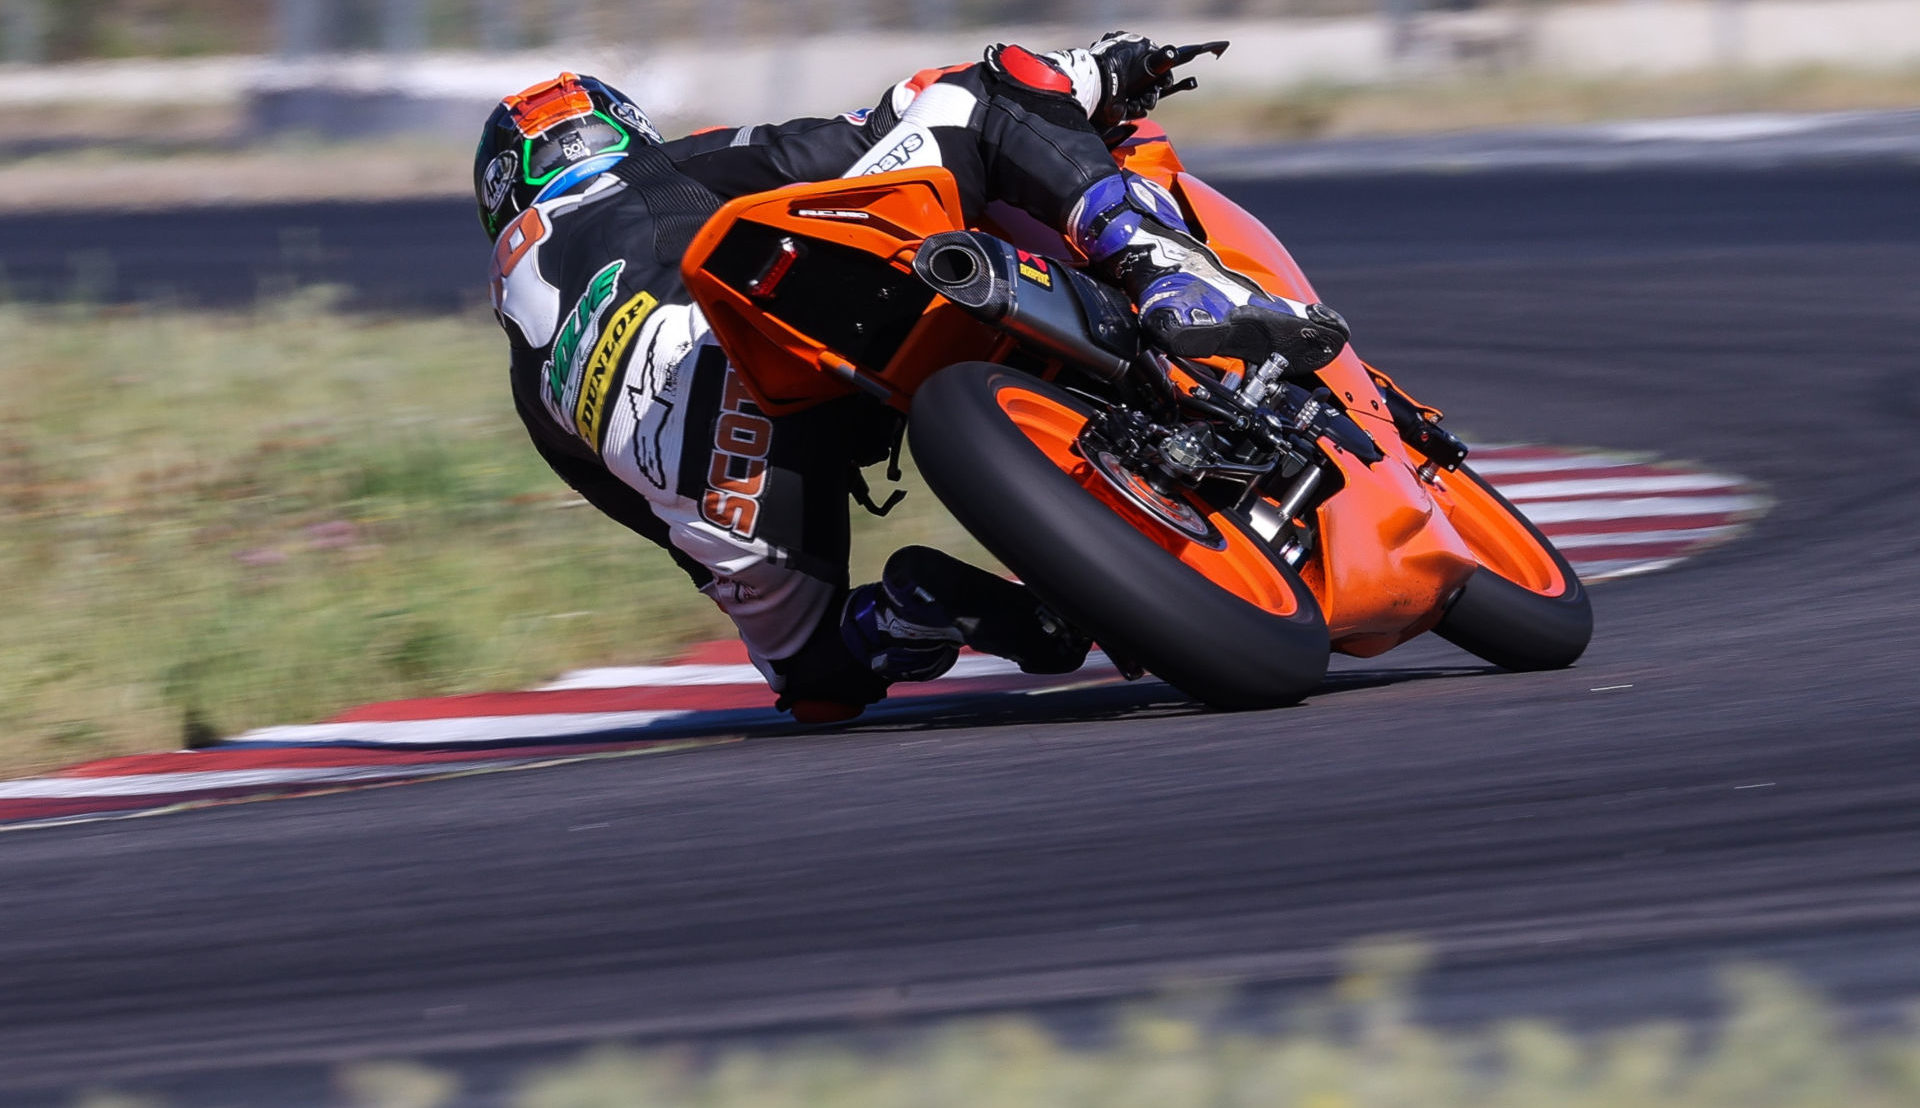 MotoAmerica Junior Cup competitor Tyler Scott in action during testing at Brainerd. Photo by Brian J. Nelson.